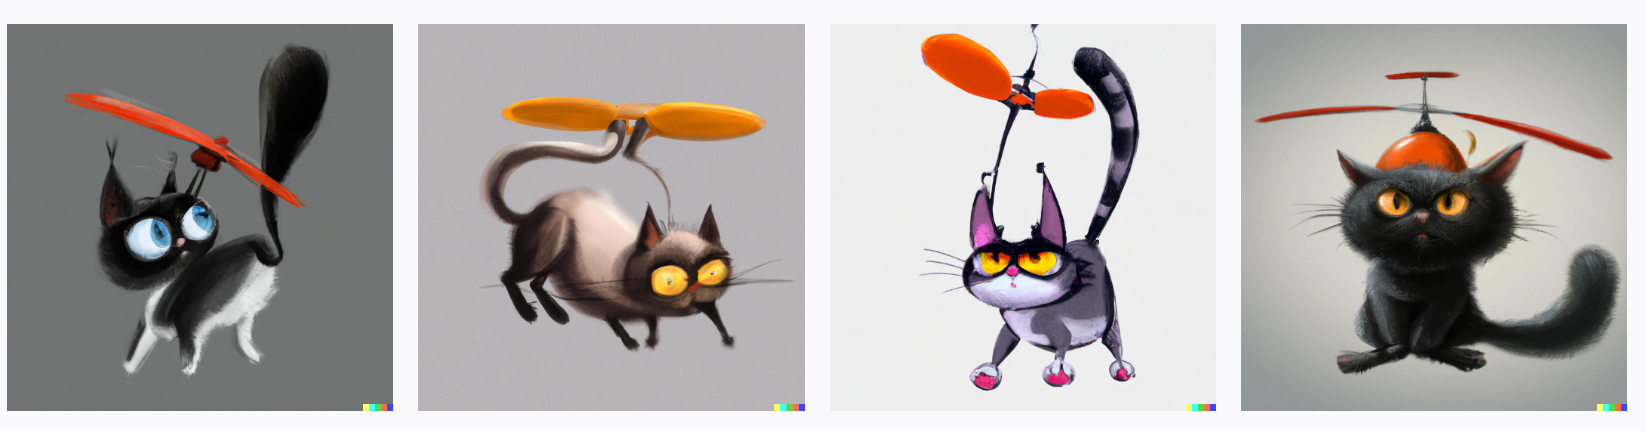 Helicopter cat with big eyes that spins its tail like a propelling, digital art